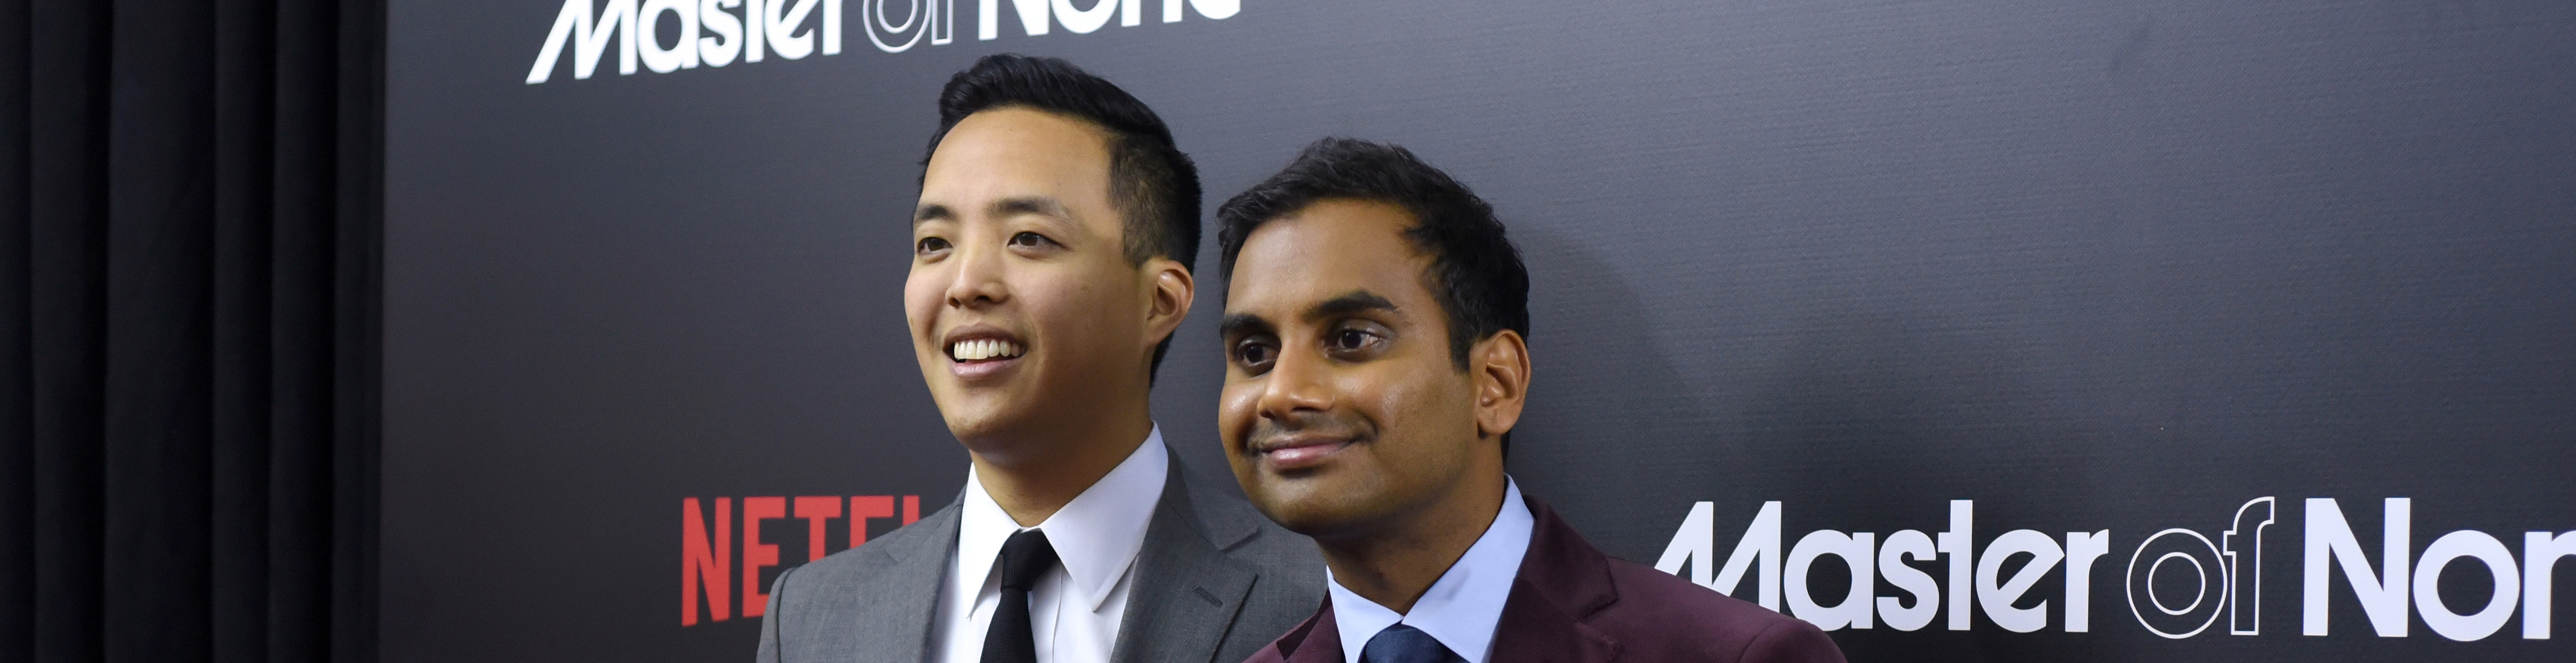 NEW YORK, NY - NOVEMBER 05: Actors Alan Yang (L) and Aziz Ansari attend the "Master Of None" New York premiere at AMC Loews 19th Street East 6 Theater on November 5, 2015 in New York City. (Photo by Noam Galai/Getty Images)